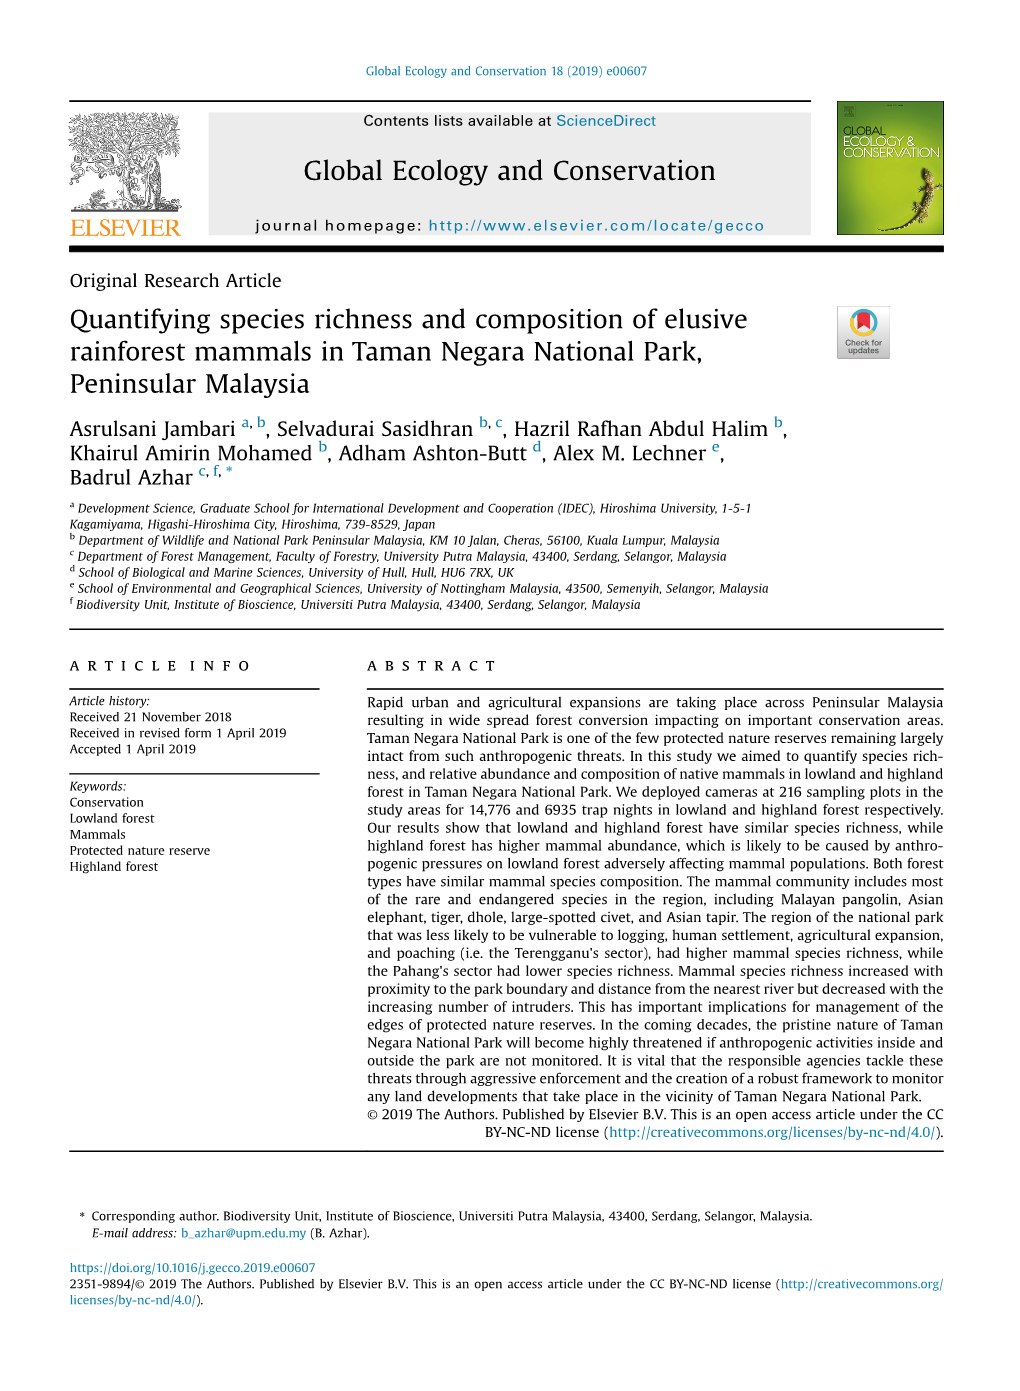 Quantifying Species Richness and Composition of Elusive Rainforest Mammals in Taman Negara National Park, Peninsular Malaysia